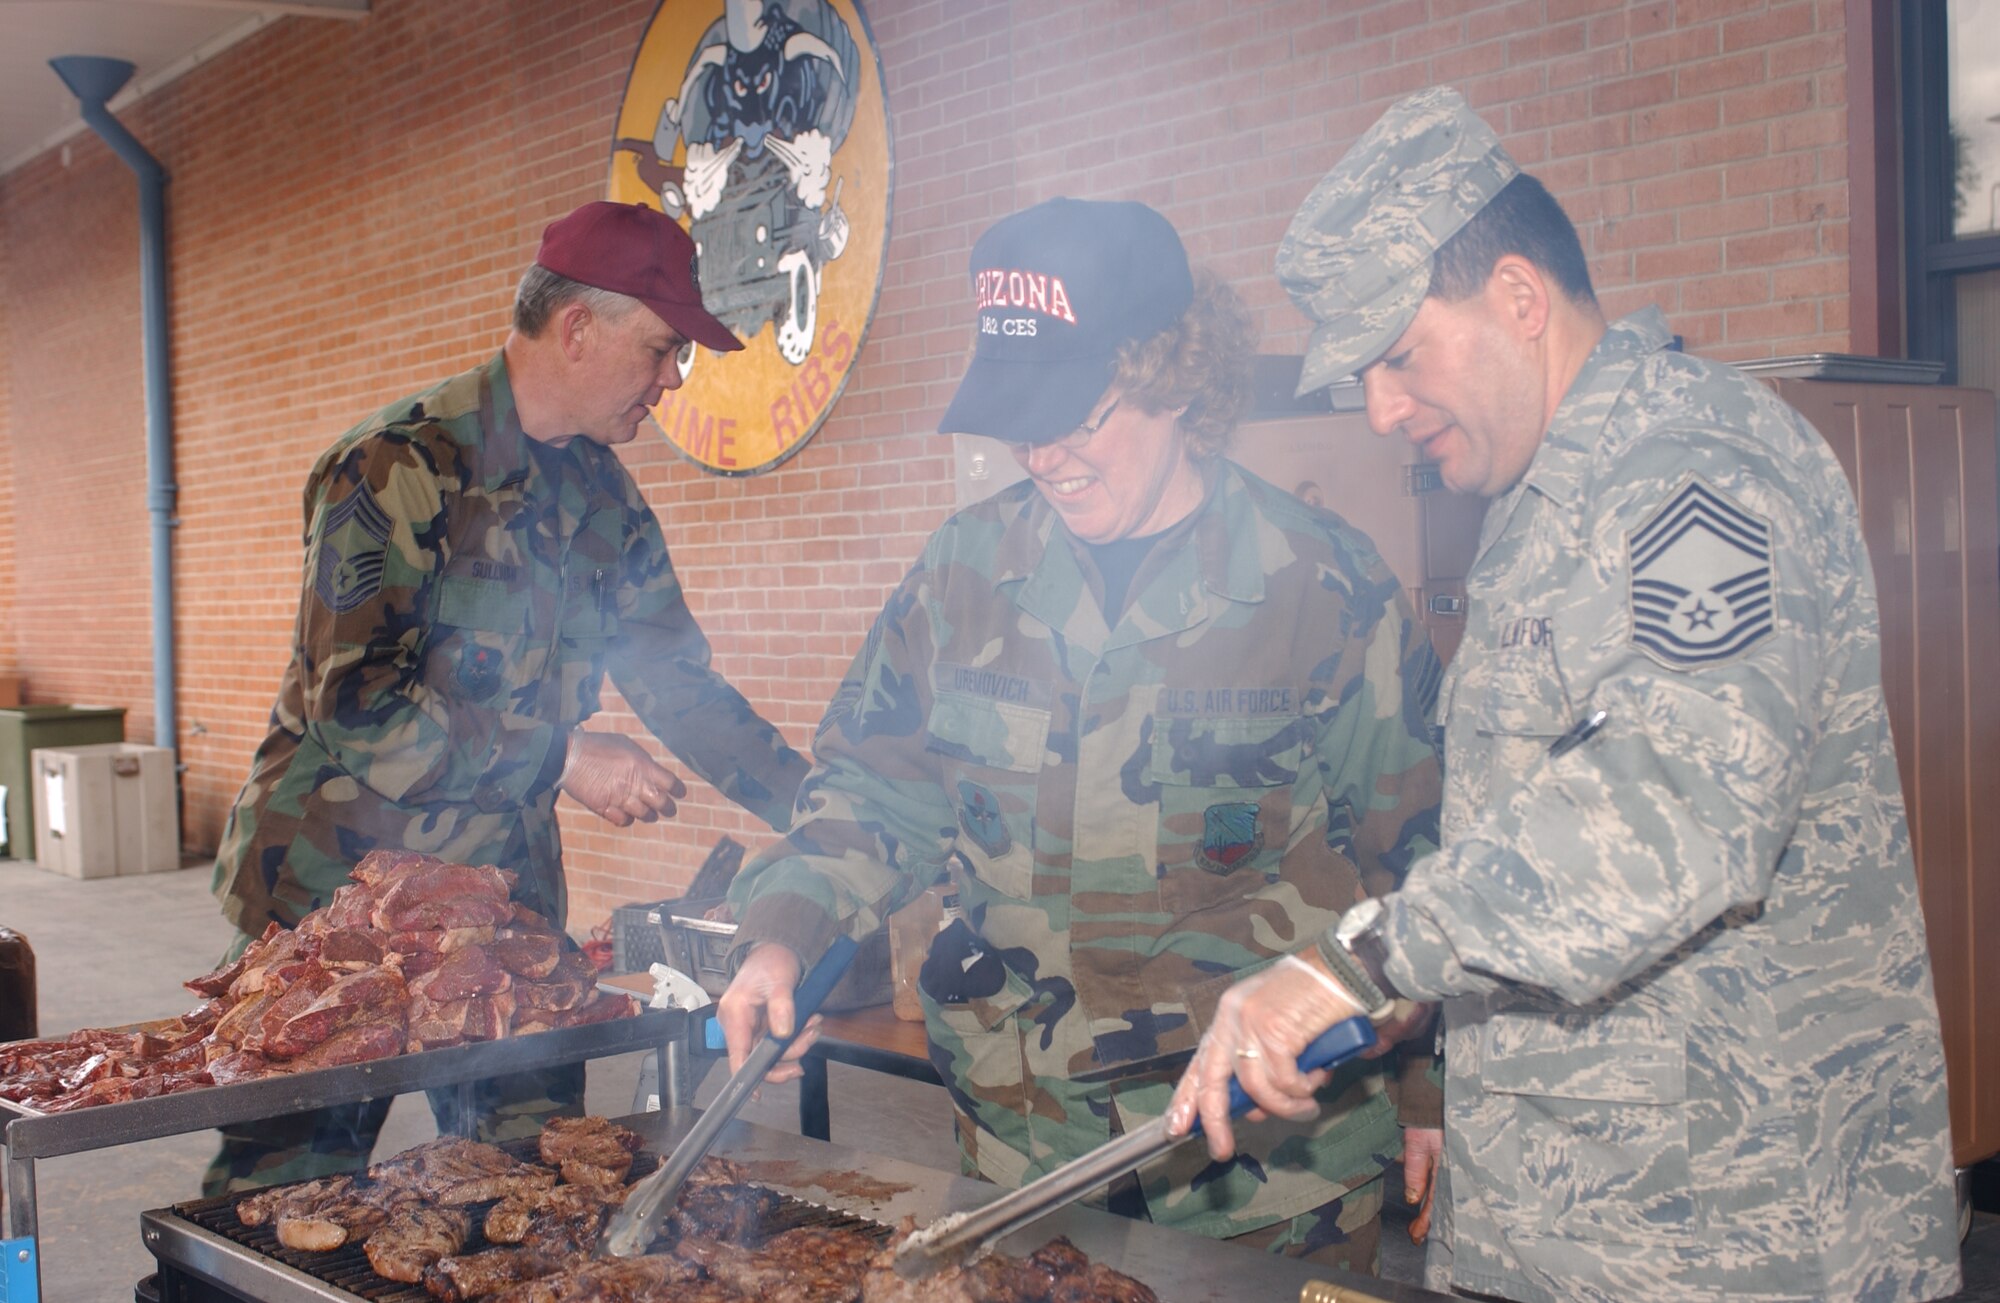 (From left to right) Chief Master Sgts. Russell Sullivan, Nikki Uremovich and George Silvas grill steaks in front of the Desert Rose Dining Facility for the wing’s annual Steak Fry event, Feb. 7. (Air National Guard photo by Senior Airman Sara Elliott)